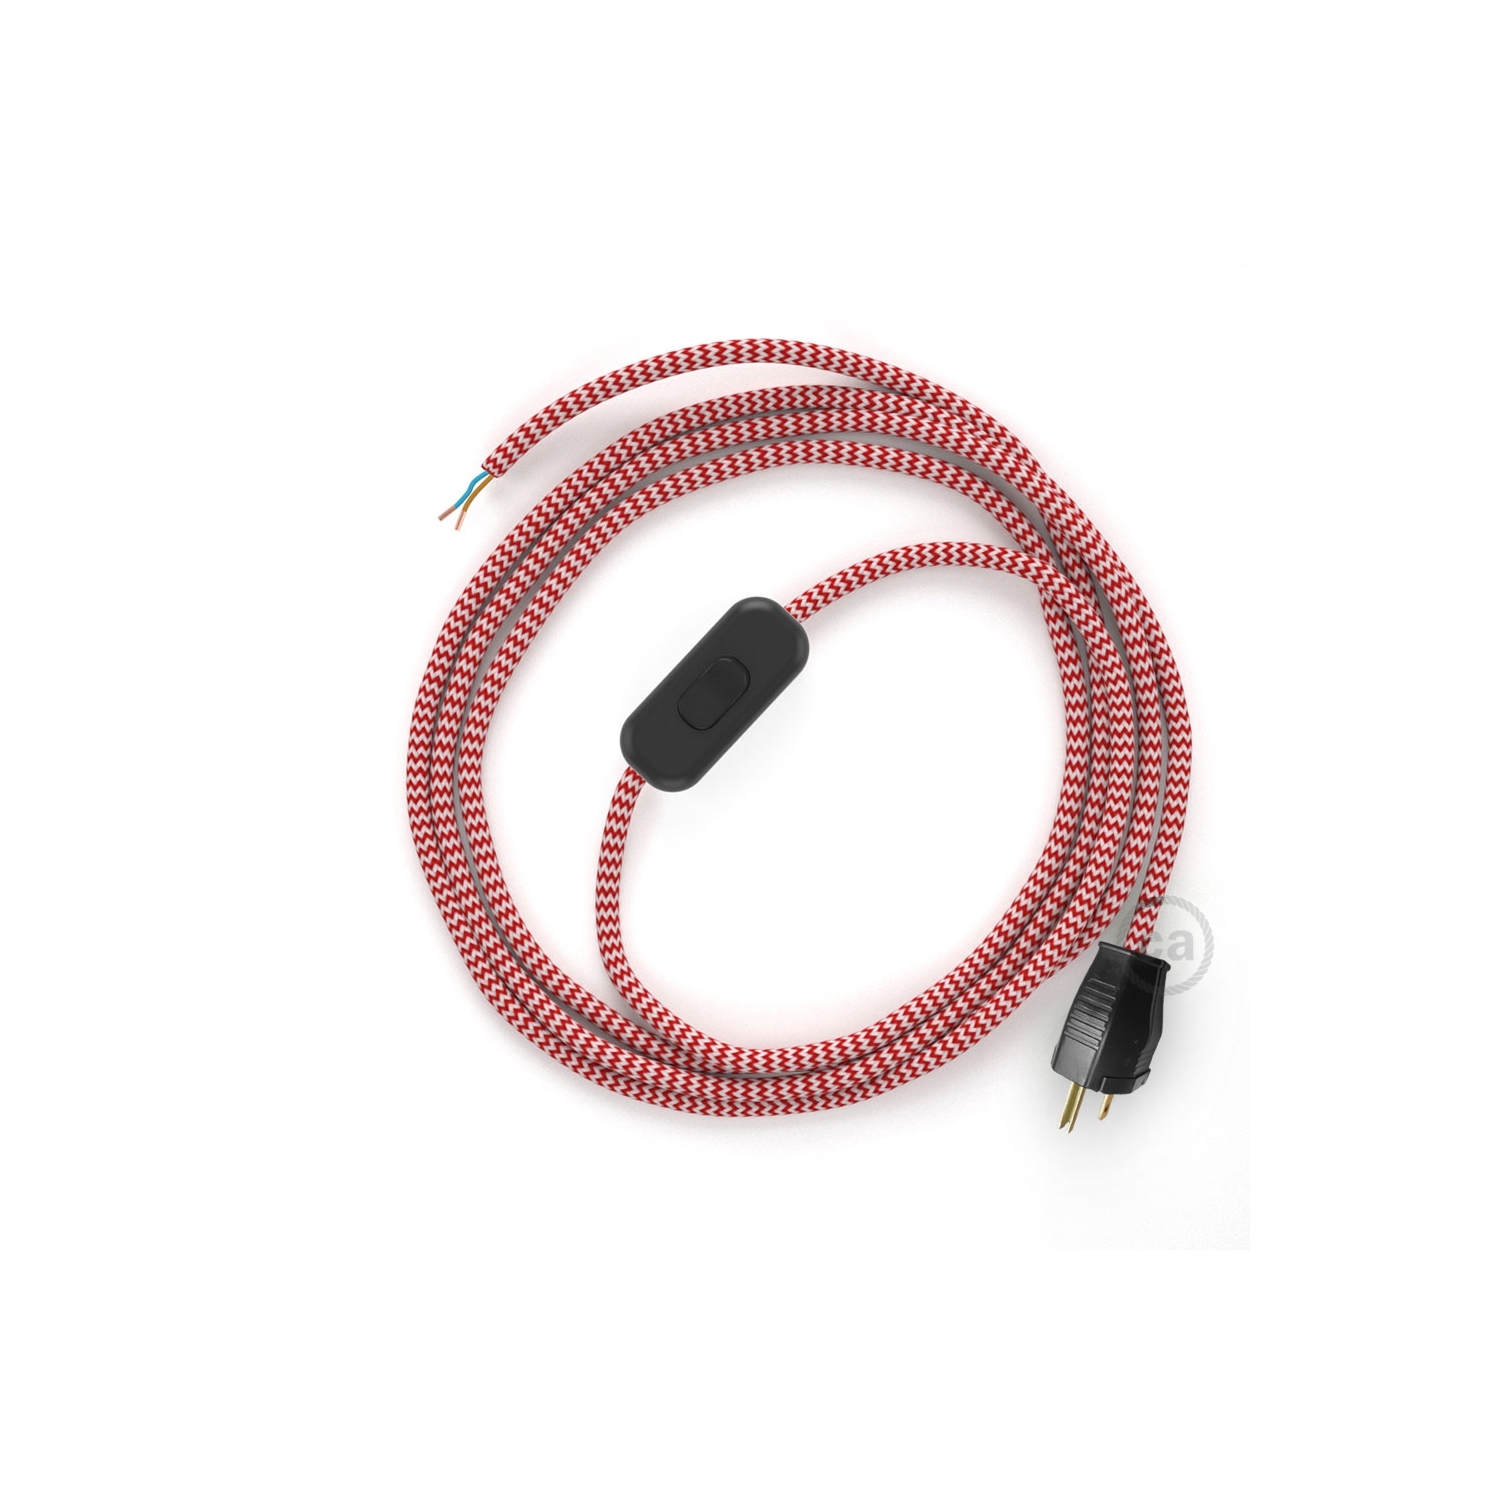 Power Cord with in-line switch, RZ09 Red & White Chevron - Choose color of switch/plug